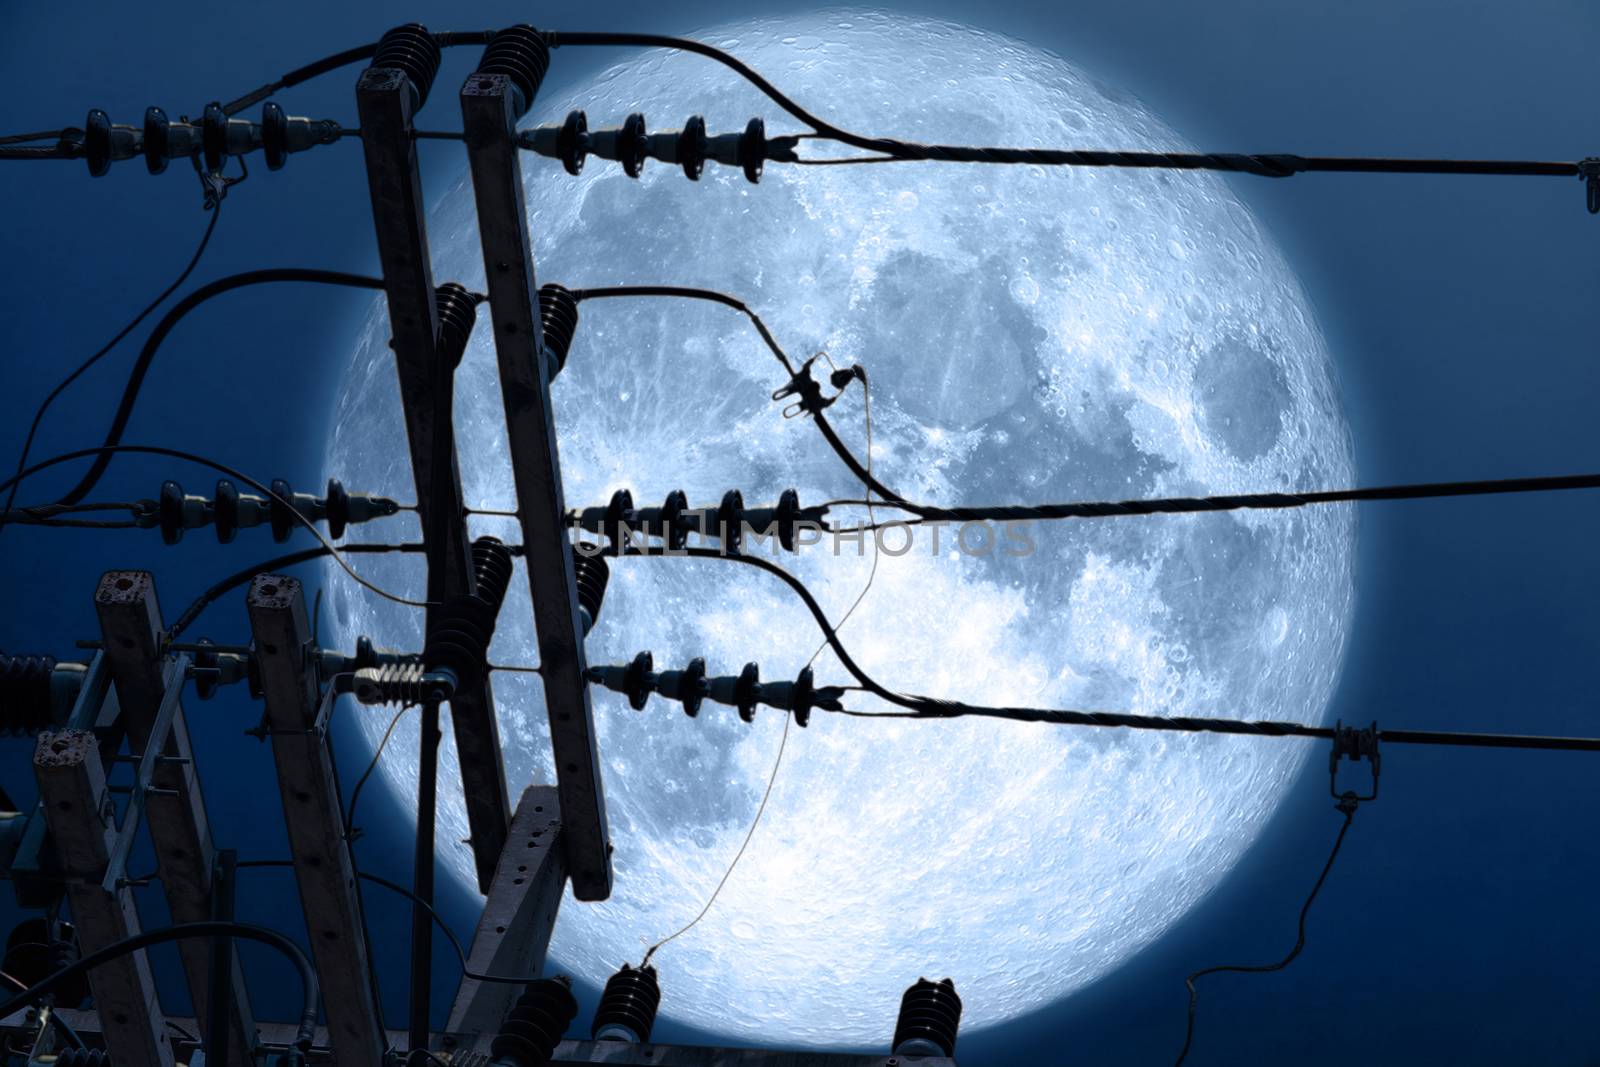 full crust moon back on silhouette power electric line on night sky, Elements of this image furnished by NASA